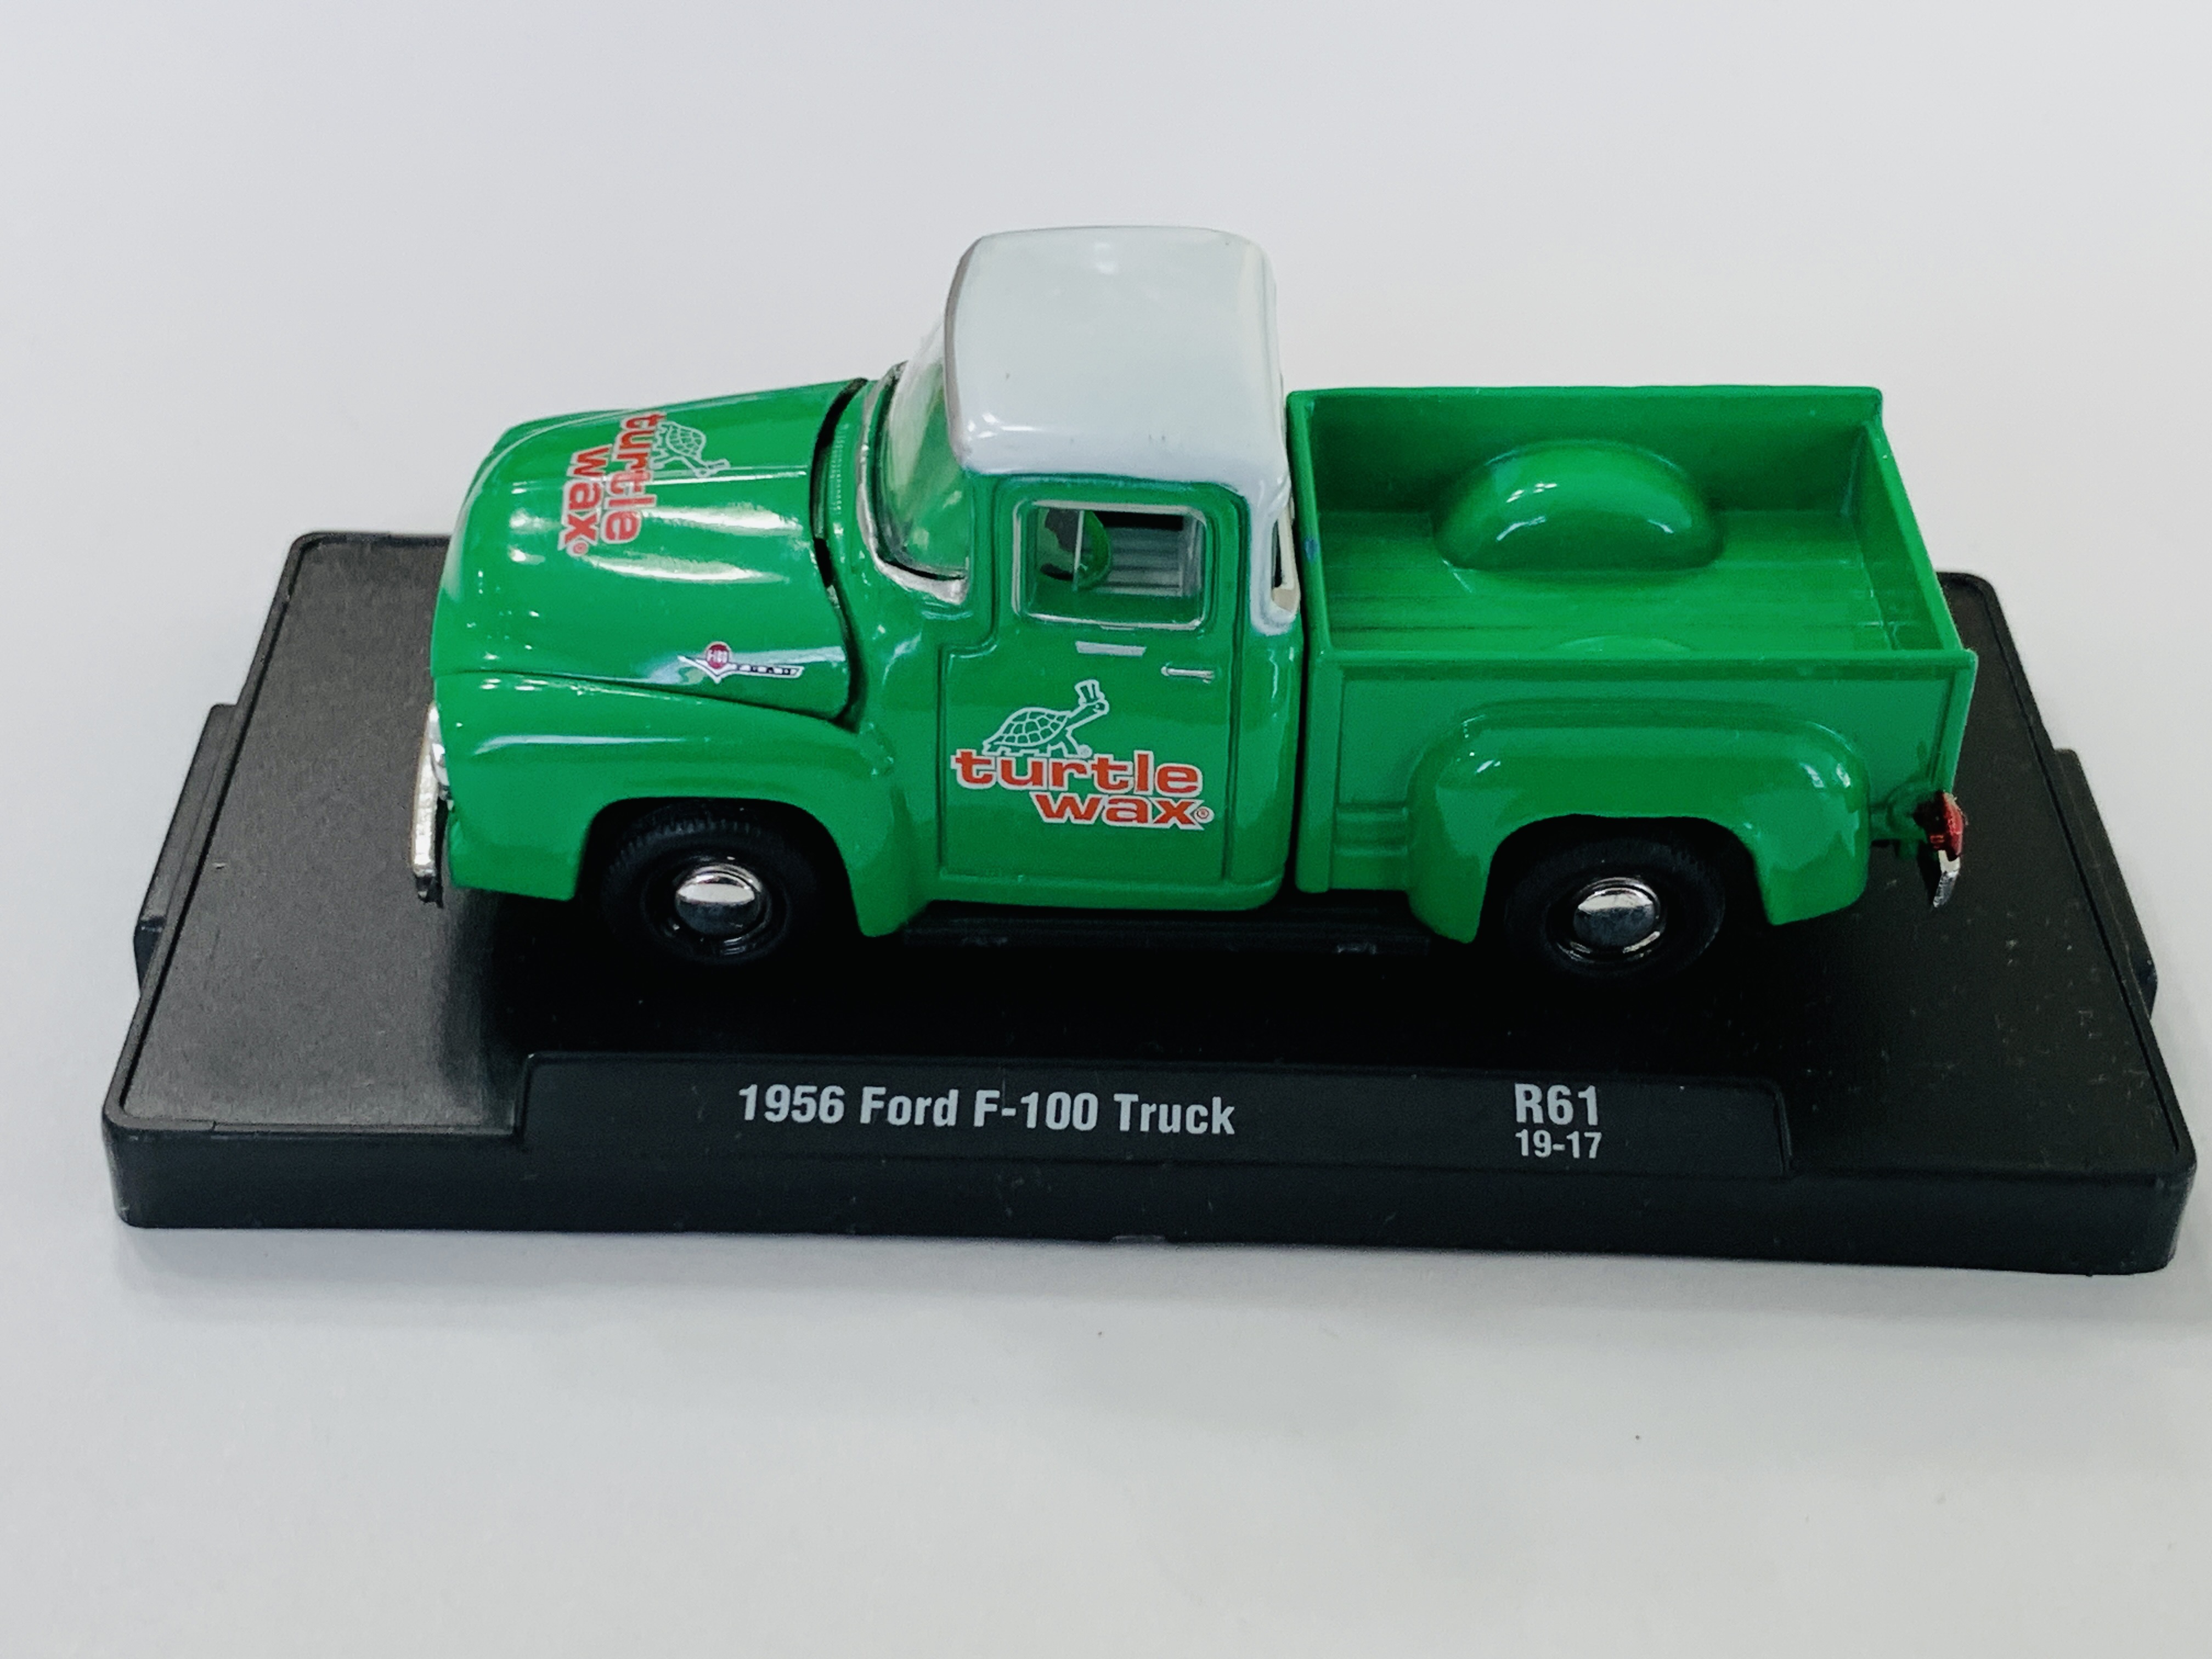 M2 Machines Turtle Wax 1956 Ford F-100 Truck R61 - As Shown